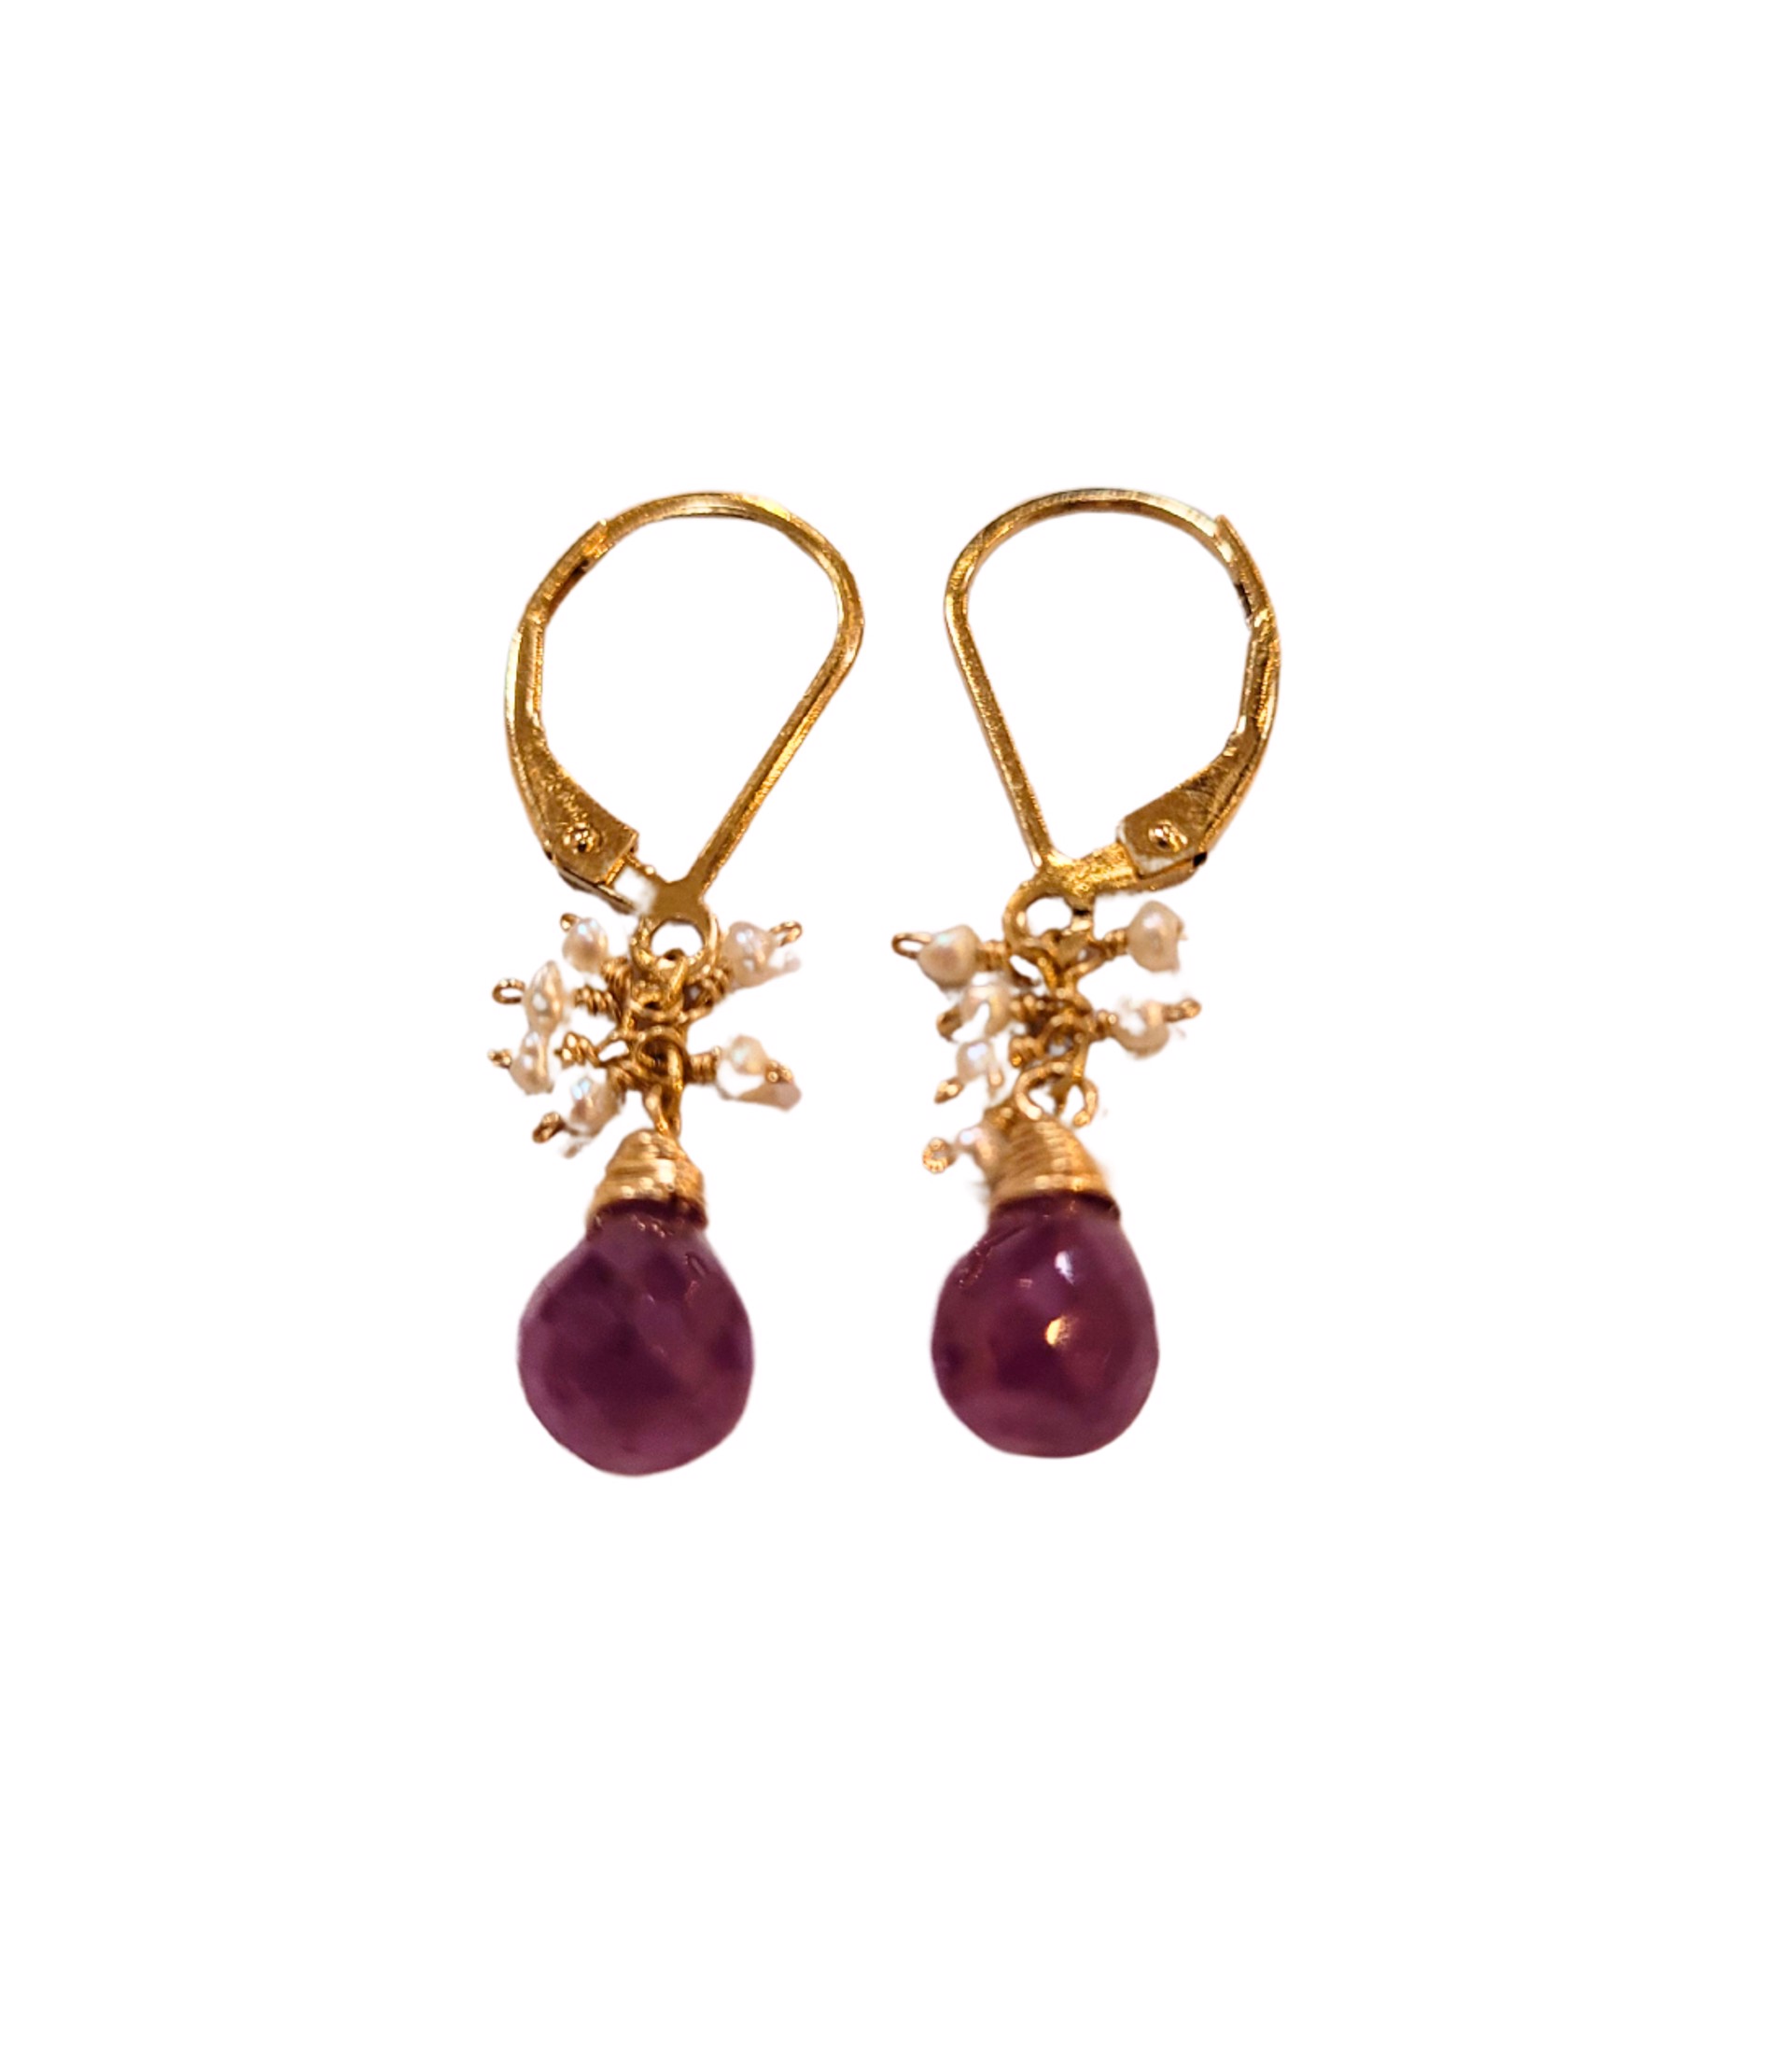 Earrings - Pink Ruby and Freshwater Pearl Drops by Julia Balestracci